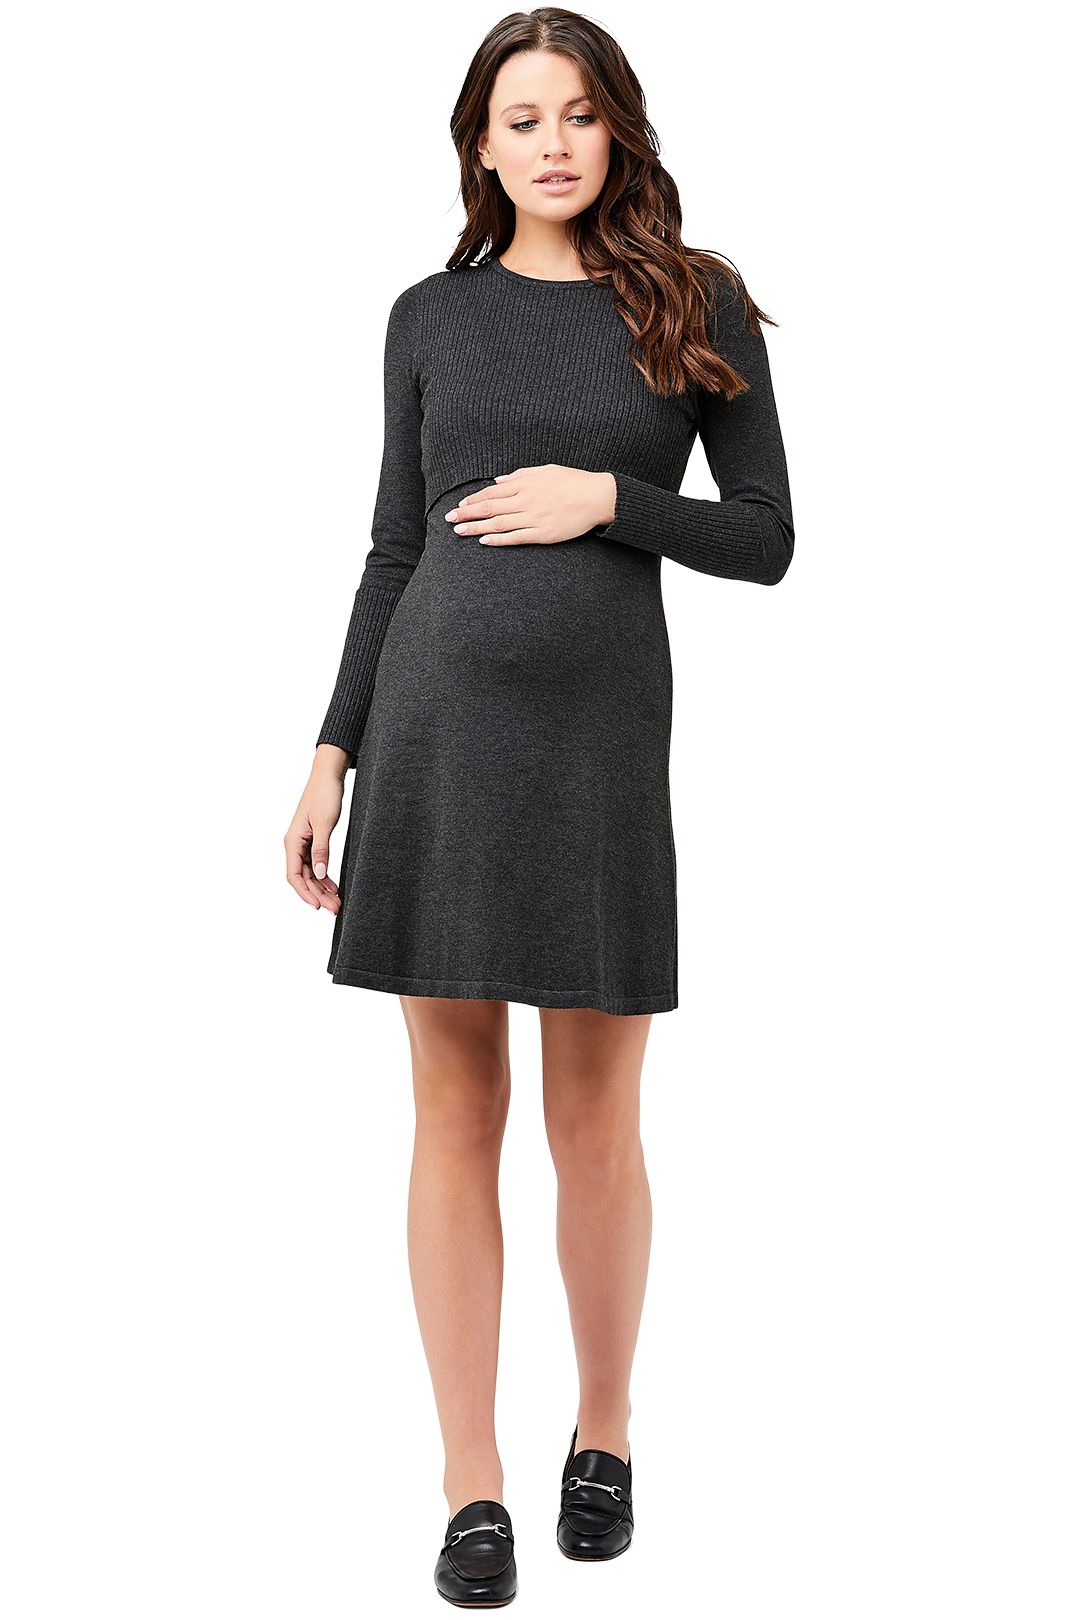 Ripe-Maternity-Molly-Nursing-Dress-Charcoal-Marle-Front